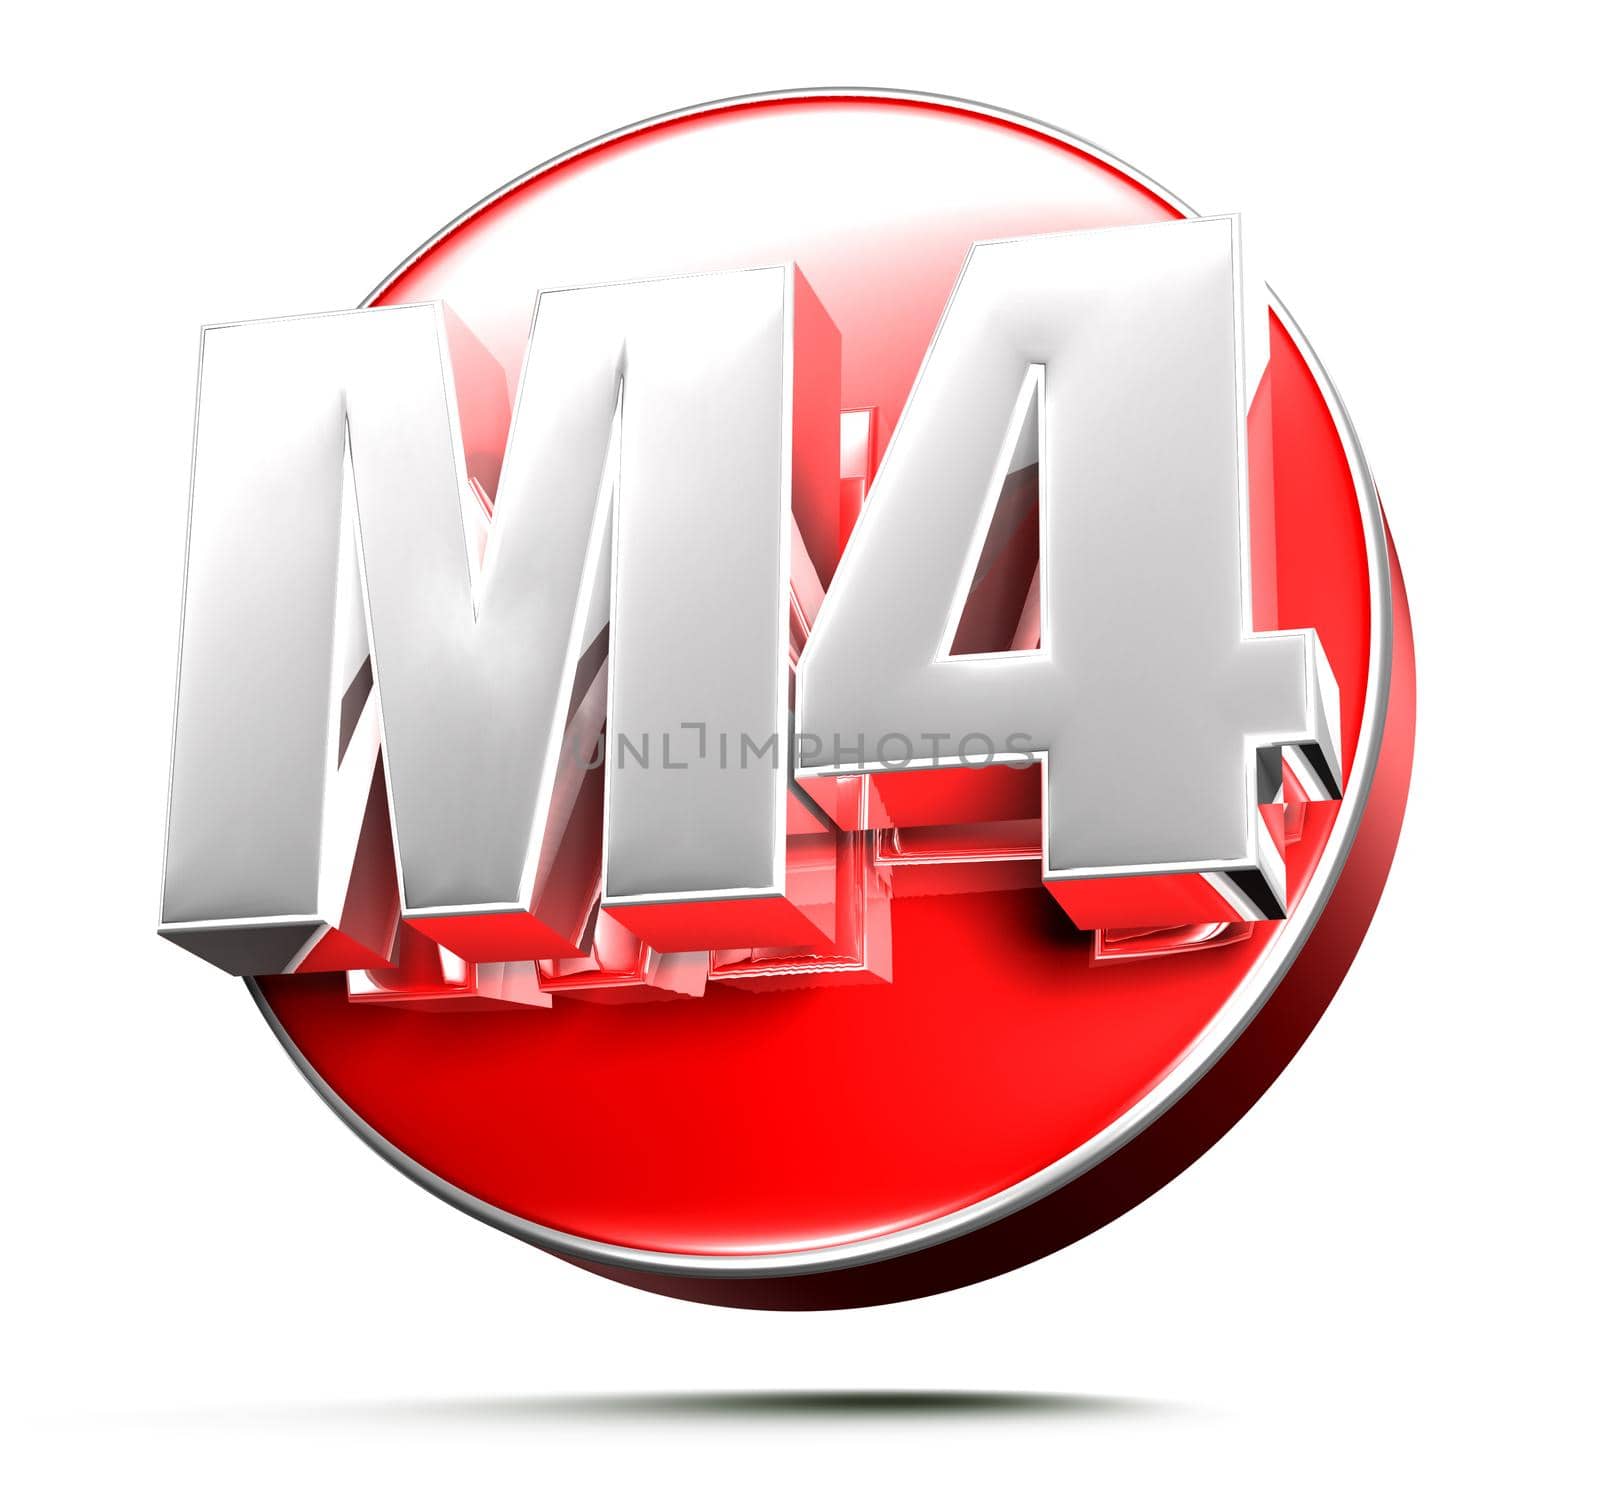 M4 red 3D illustration on white background with clipping path. by thitimontoyai